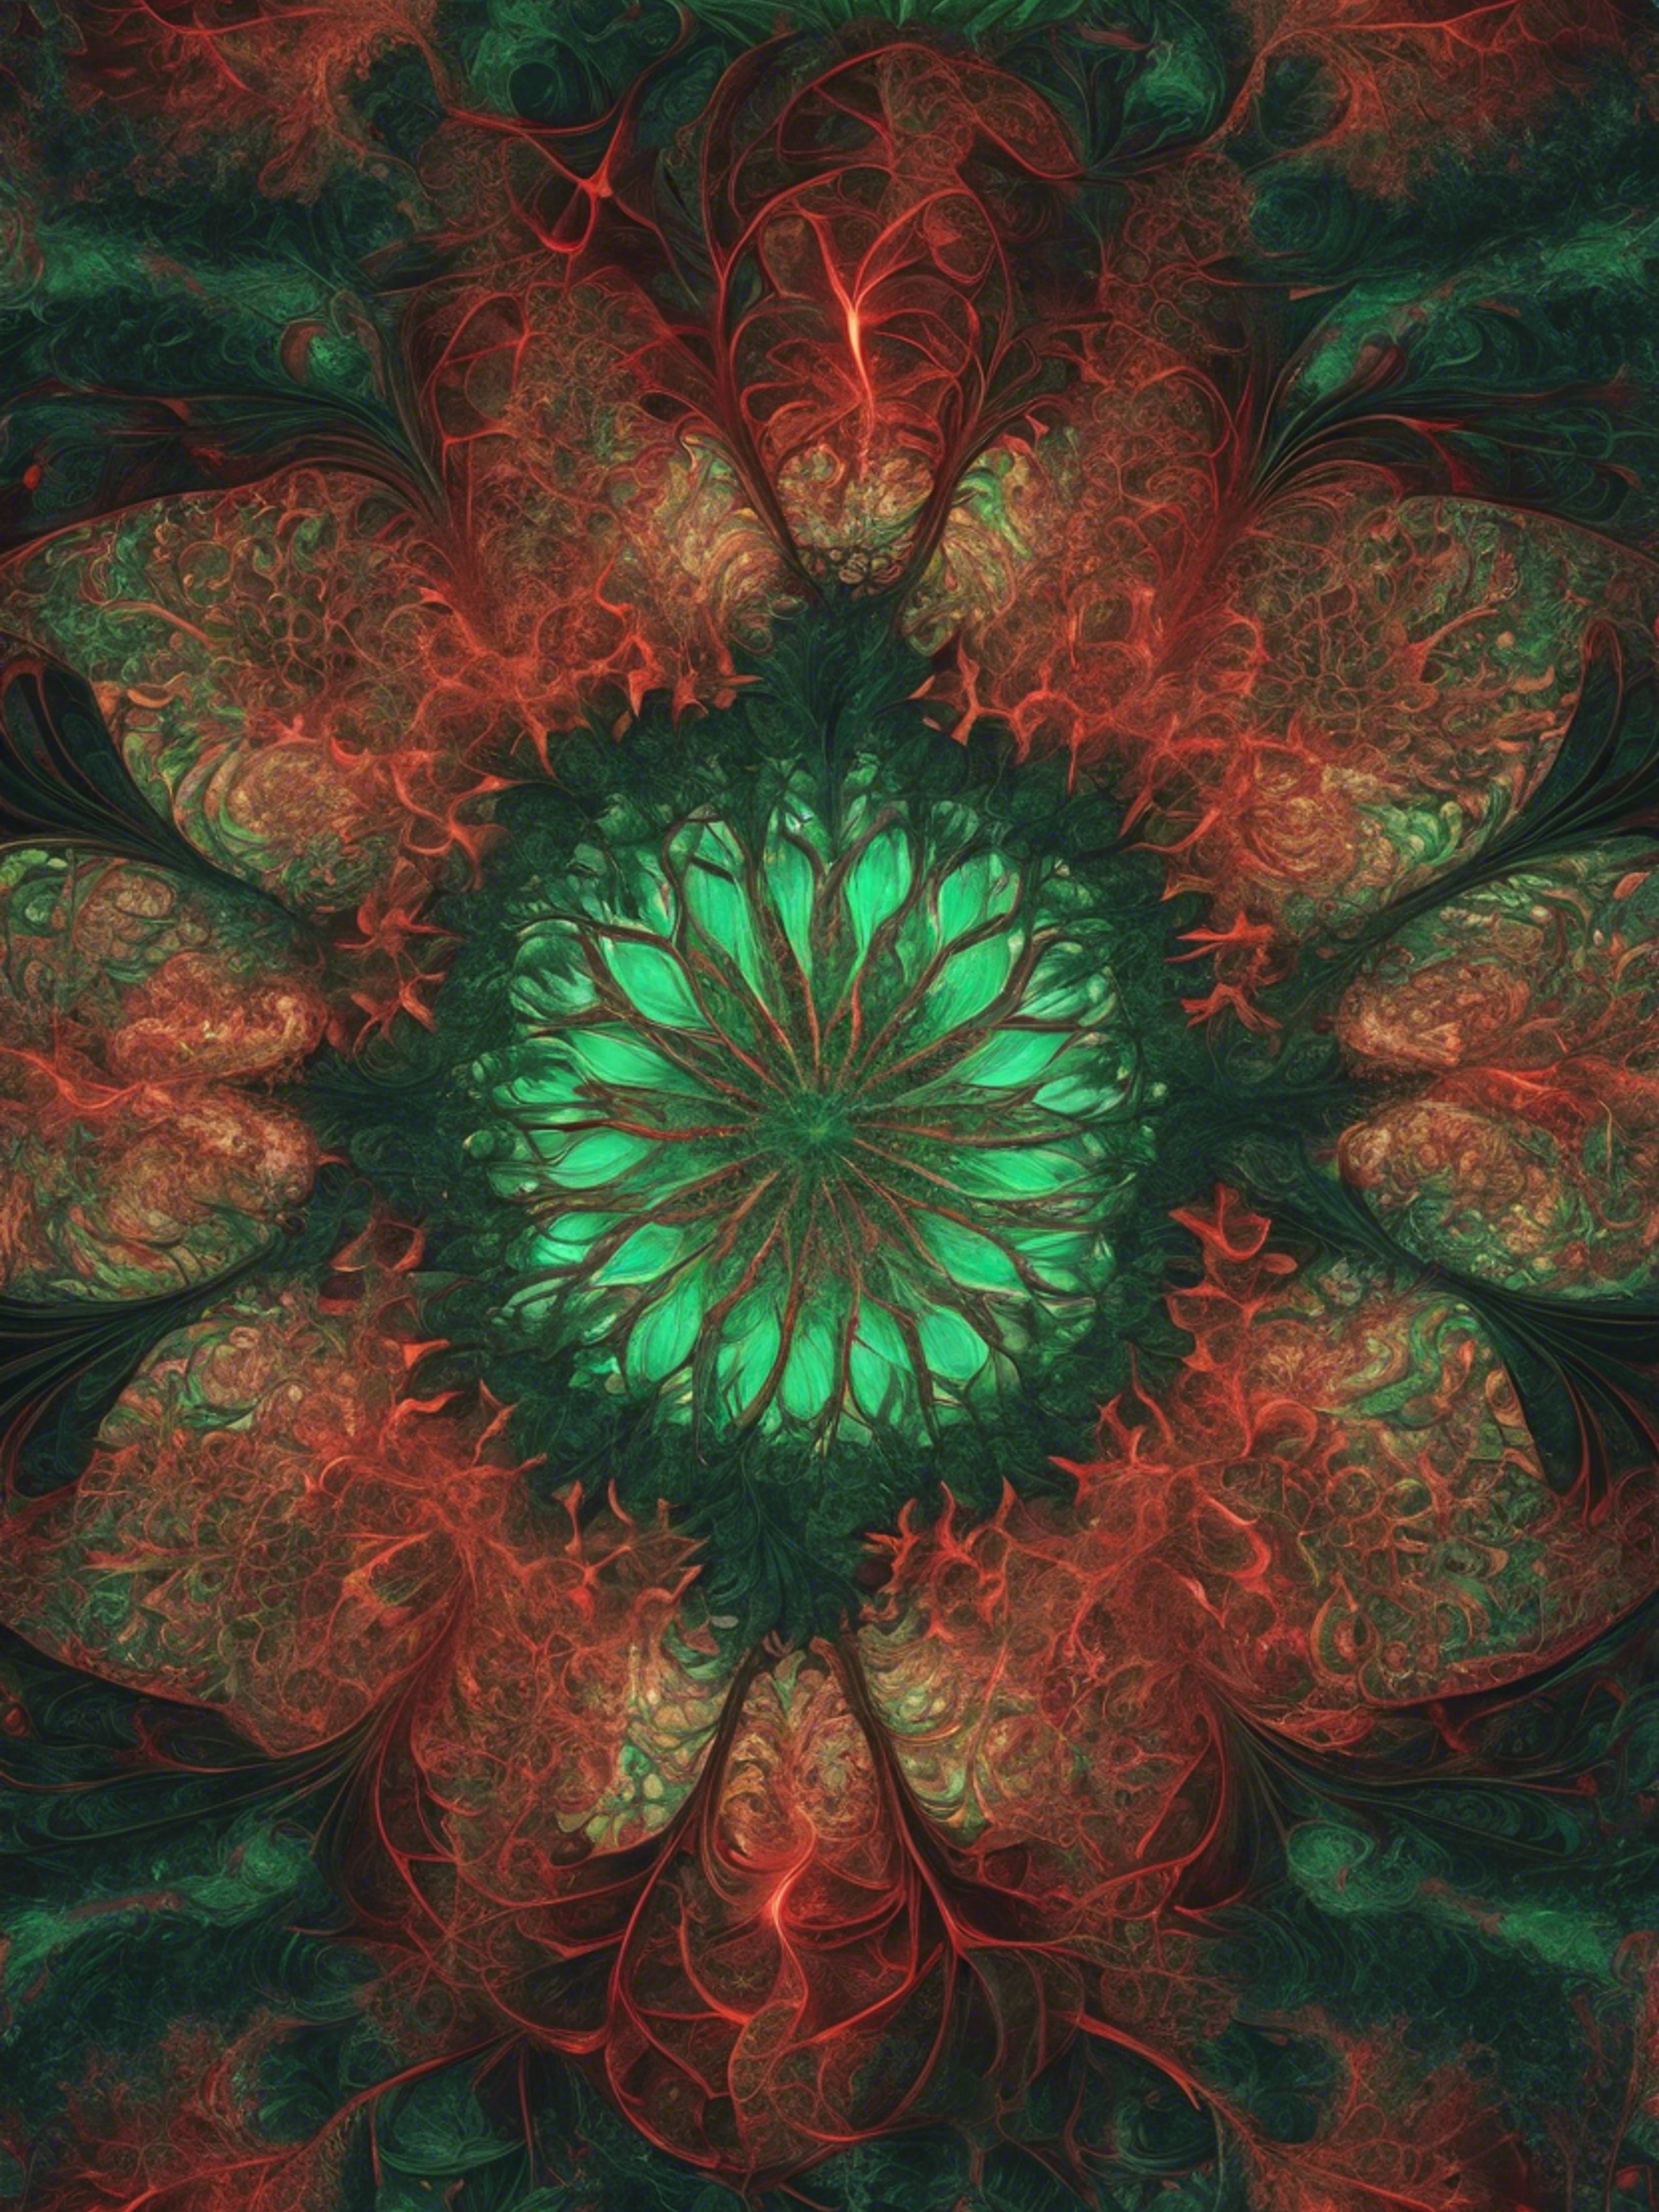 Intricate fractal patterns composed of alternating red and green hues Hintergrund[0376ed7744fd4b80a9ab]